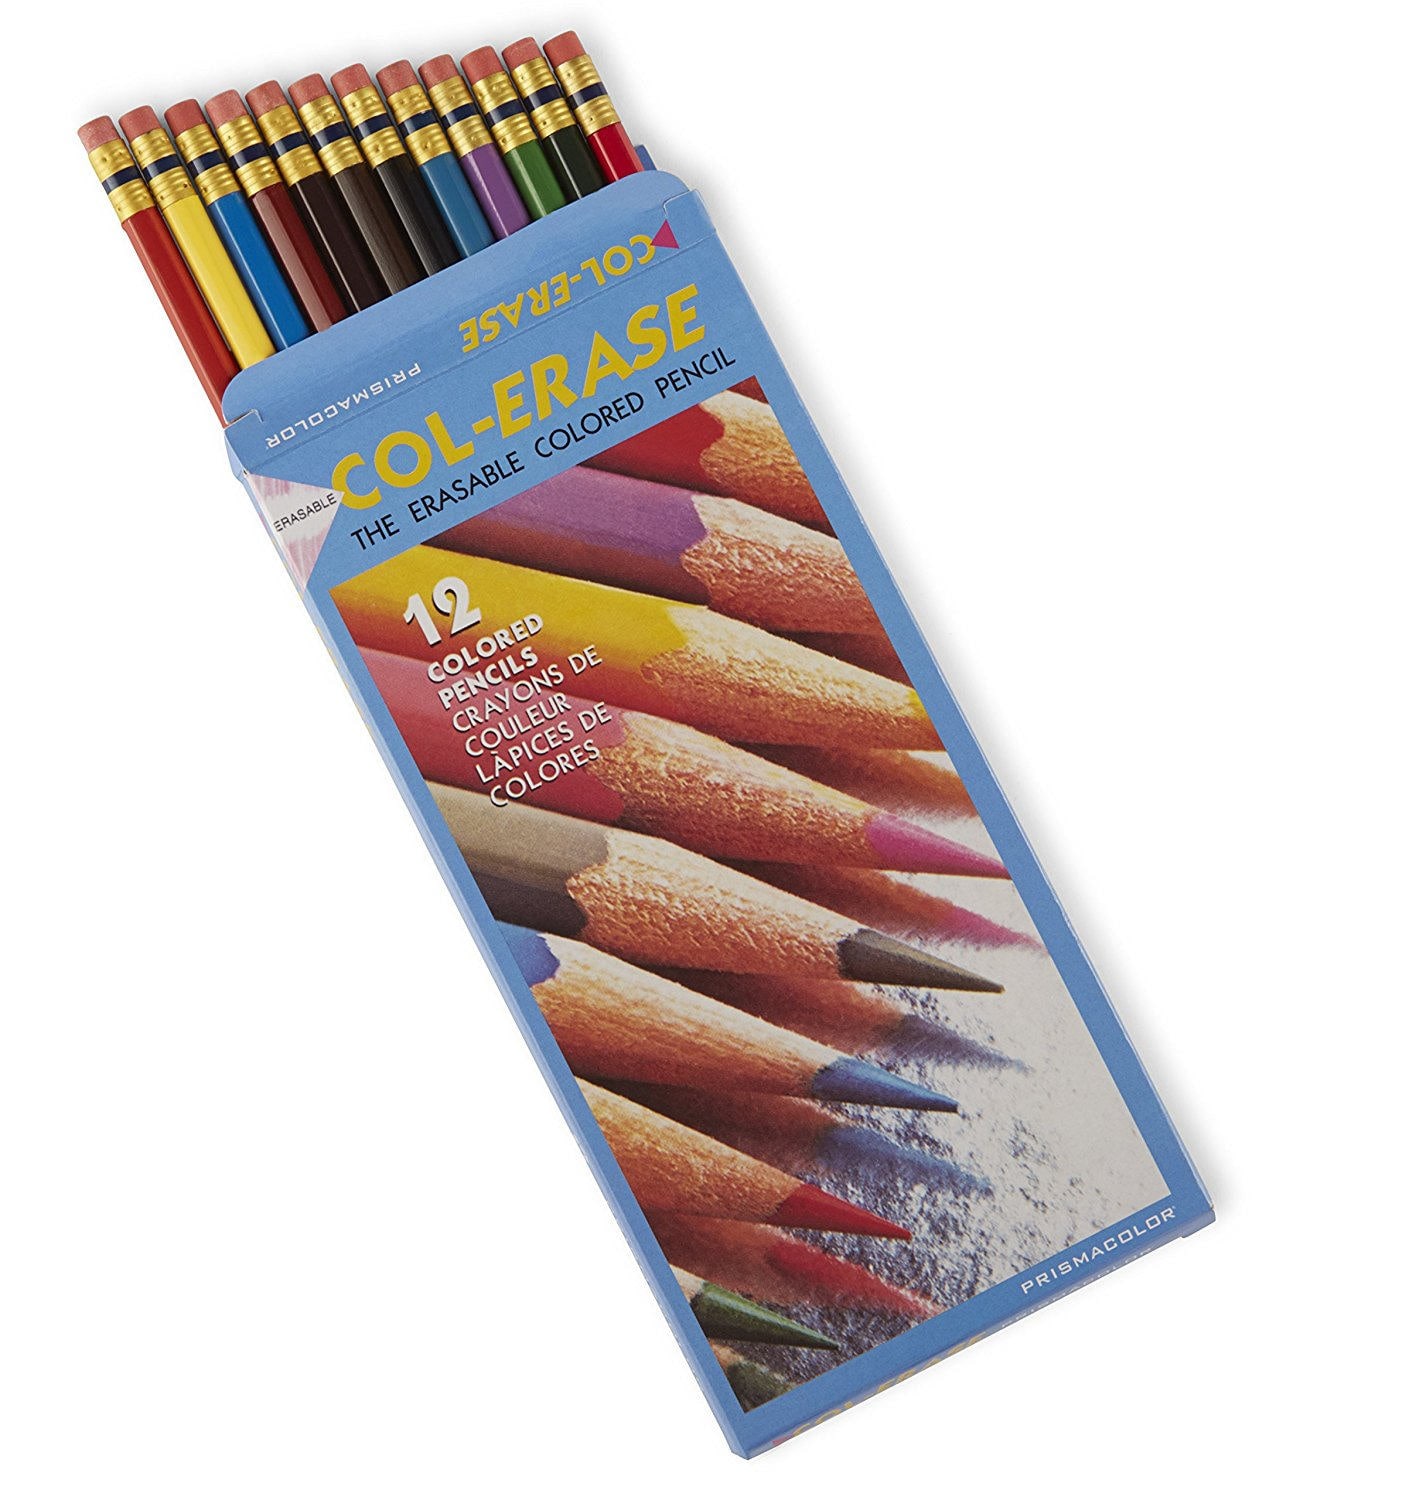 Does the 12 pack of Prismacolor colored pencils work for beginners learning  to use colored pencils? : r/ColoredPencils